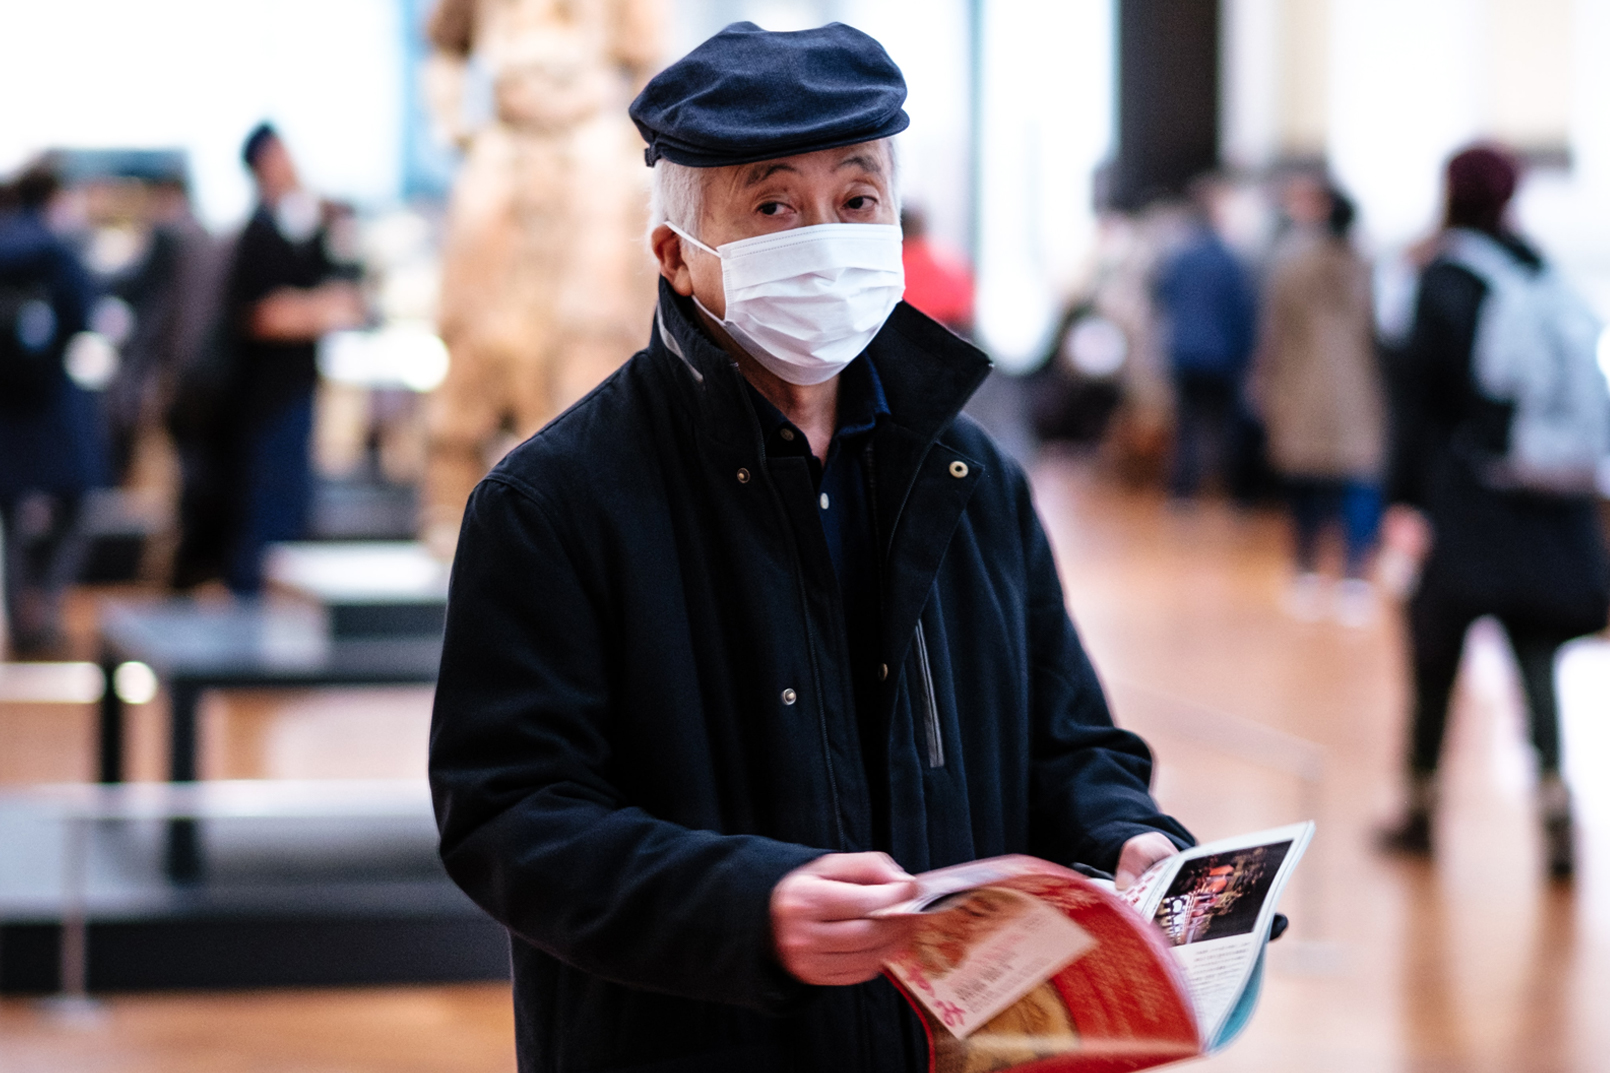 Man wearing a surgical mask